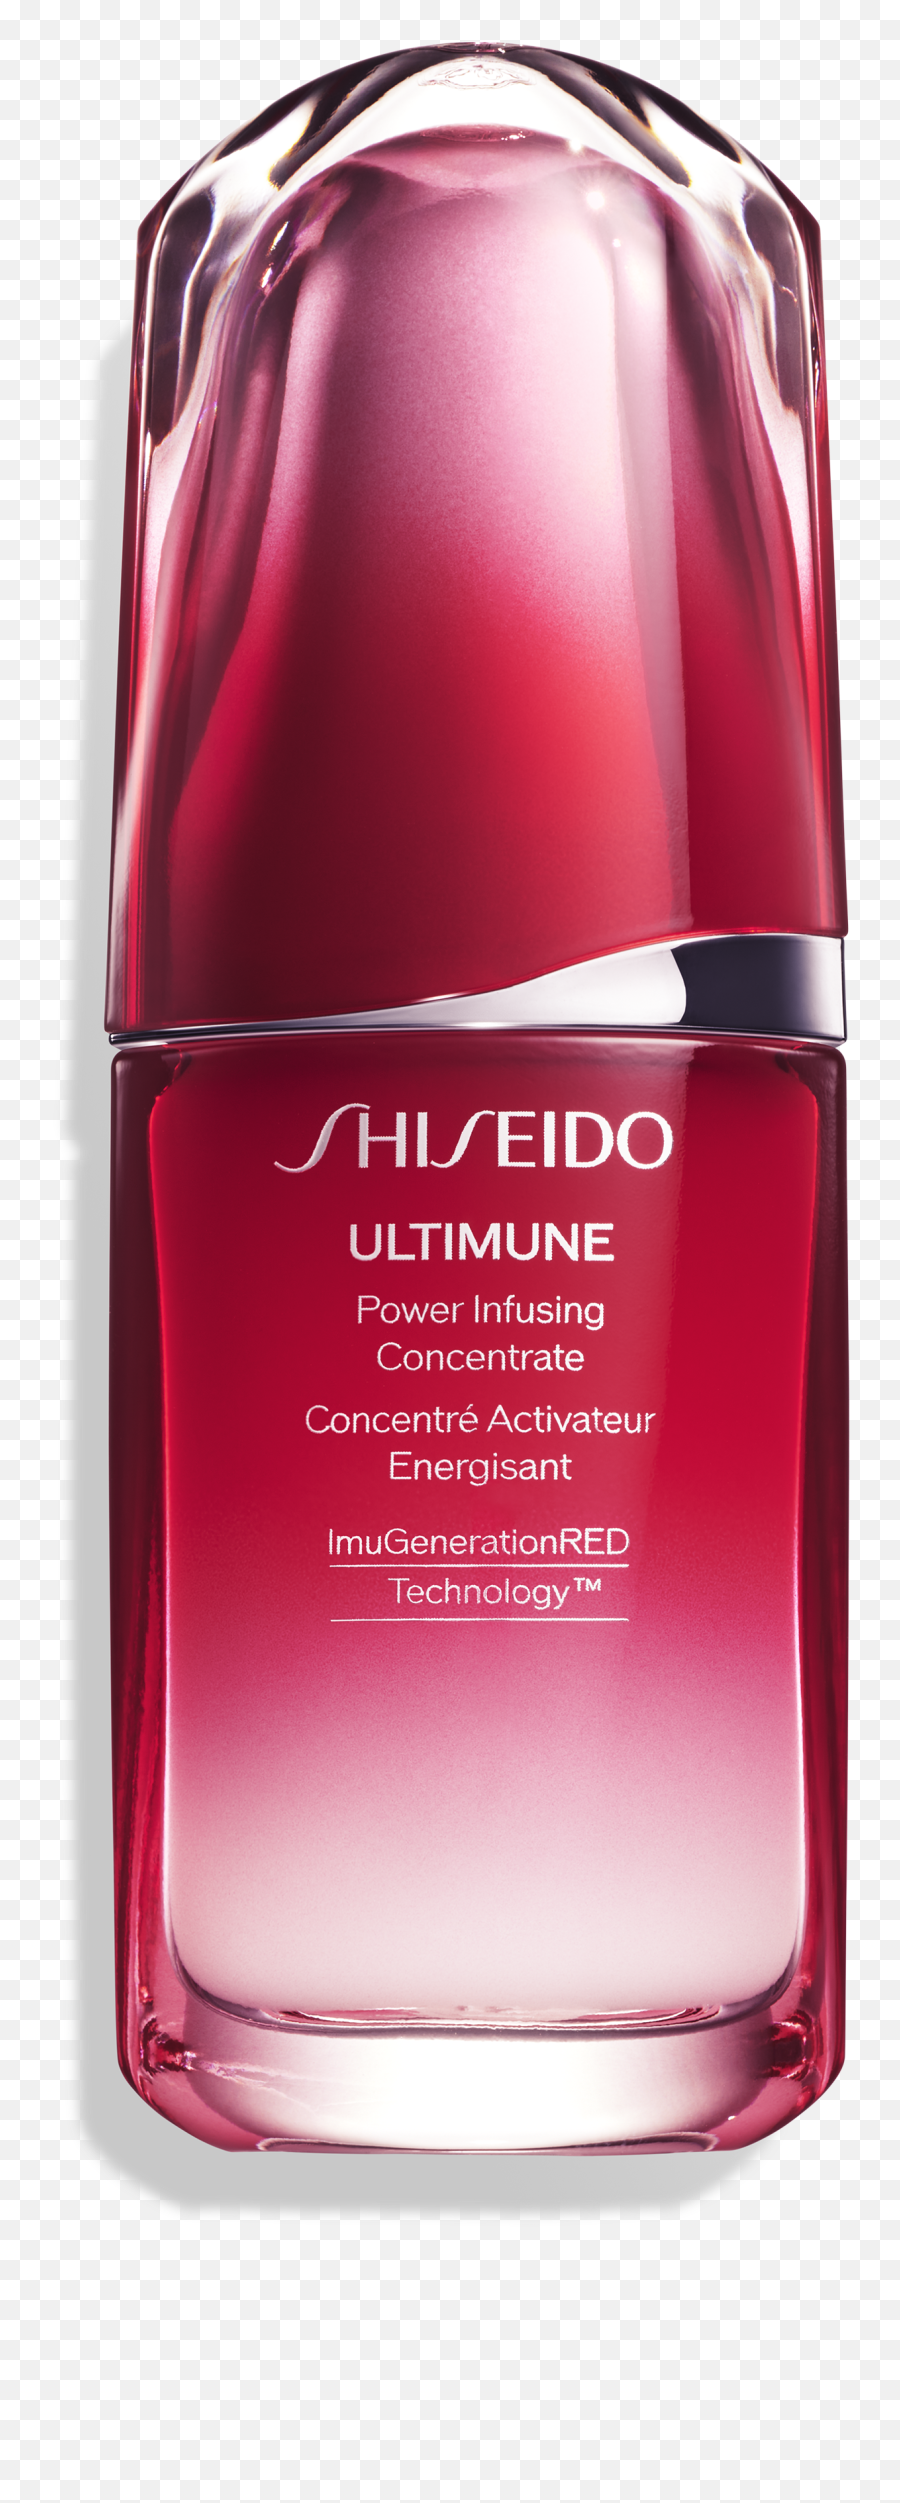 Bh Cosmetics Hydrocolloid Pimple Patches - Shiseido Ultimune Power Infusing Concentrate Png,Bh Cosmetics Icon